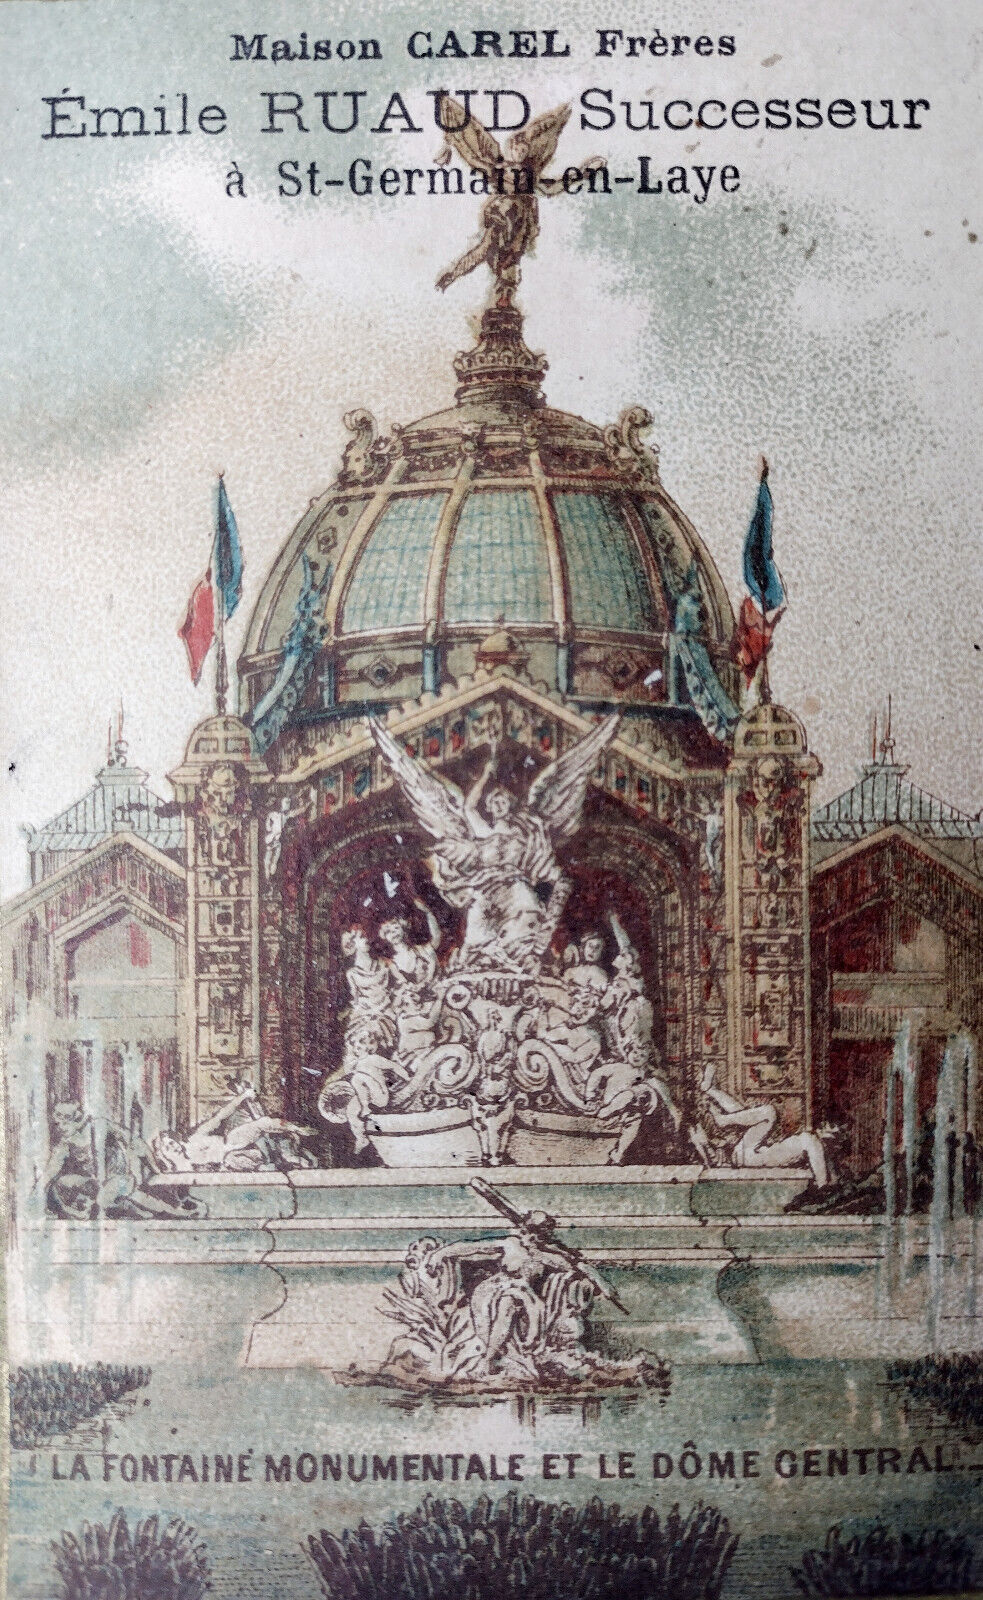 Victorian 1800s French Advertising Trade Card Fontaine Monumentale Dome Central